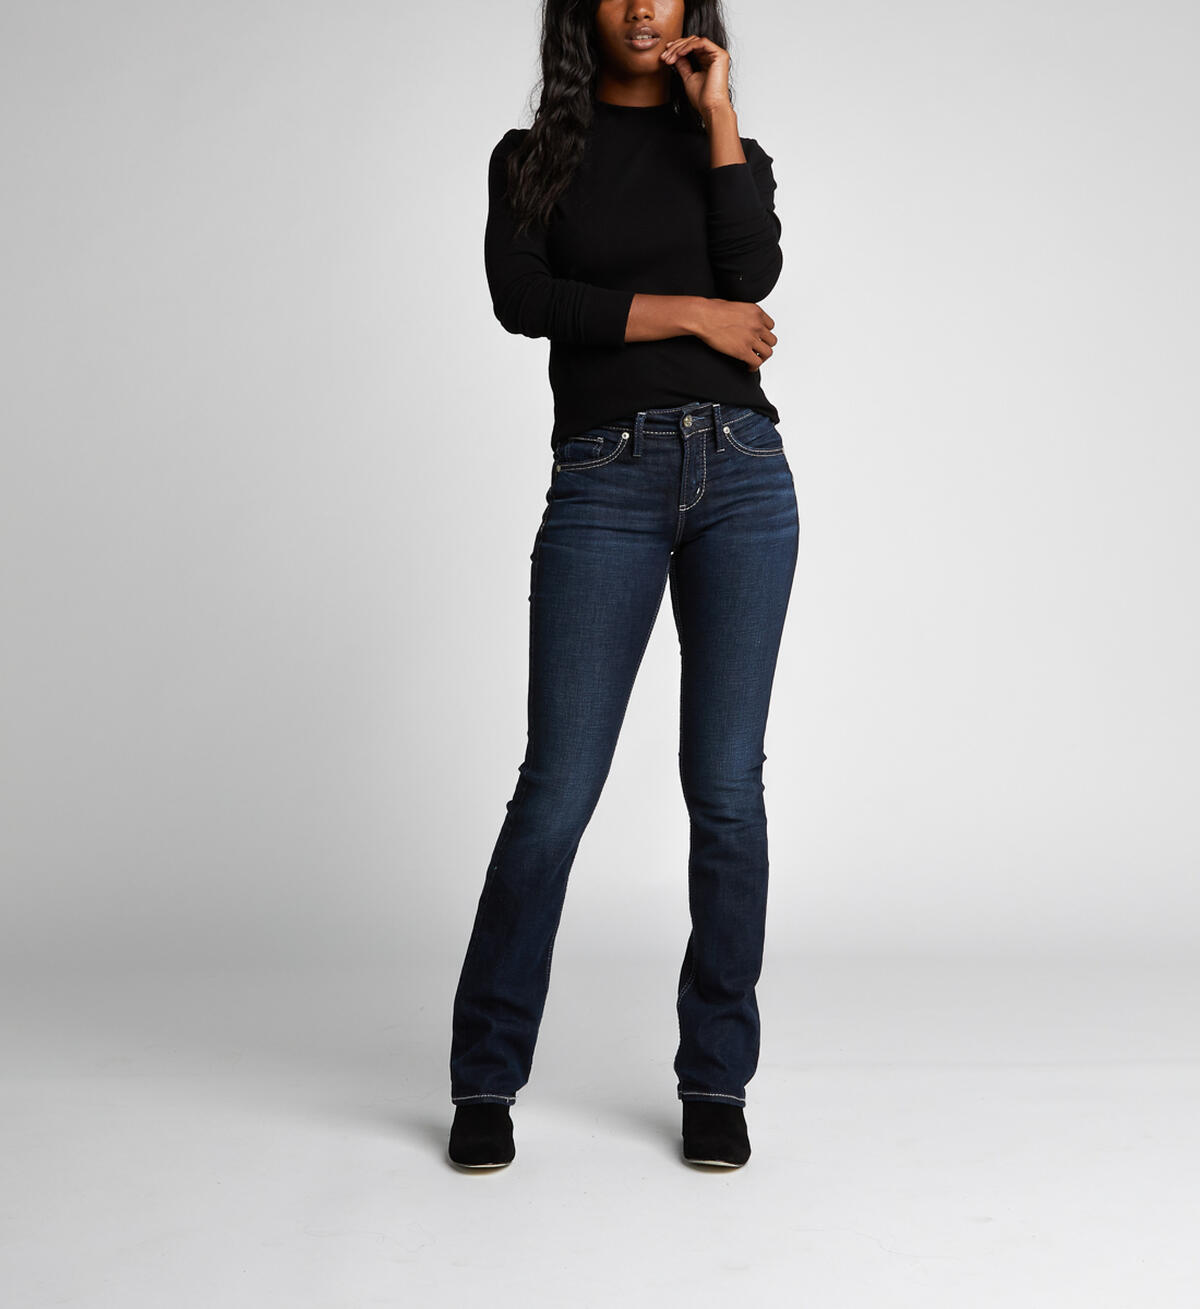 Avery High-Rise Curvy Slim Bootcut Jeans, , hi-res image number 3